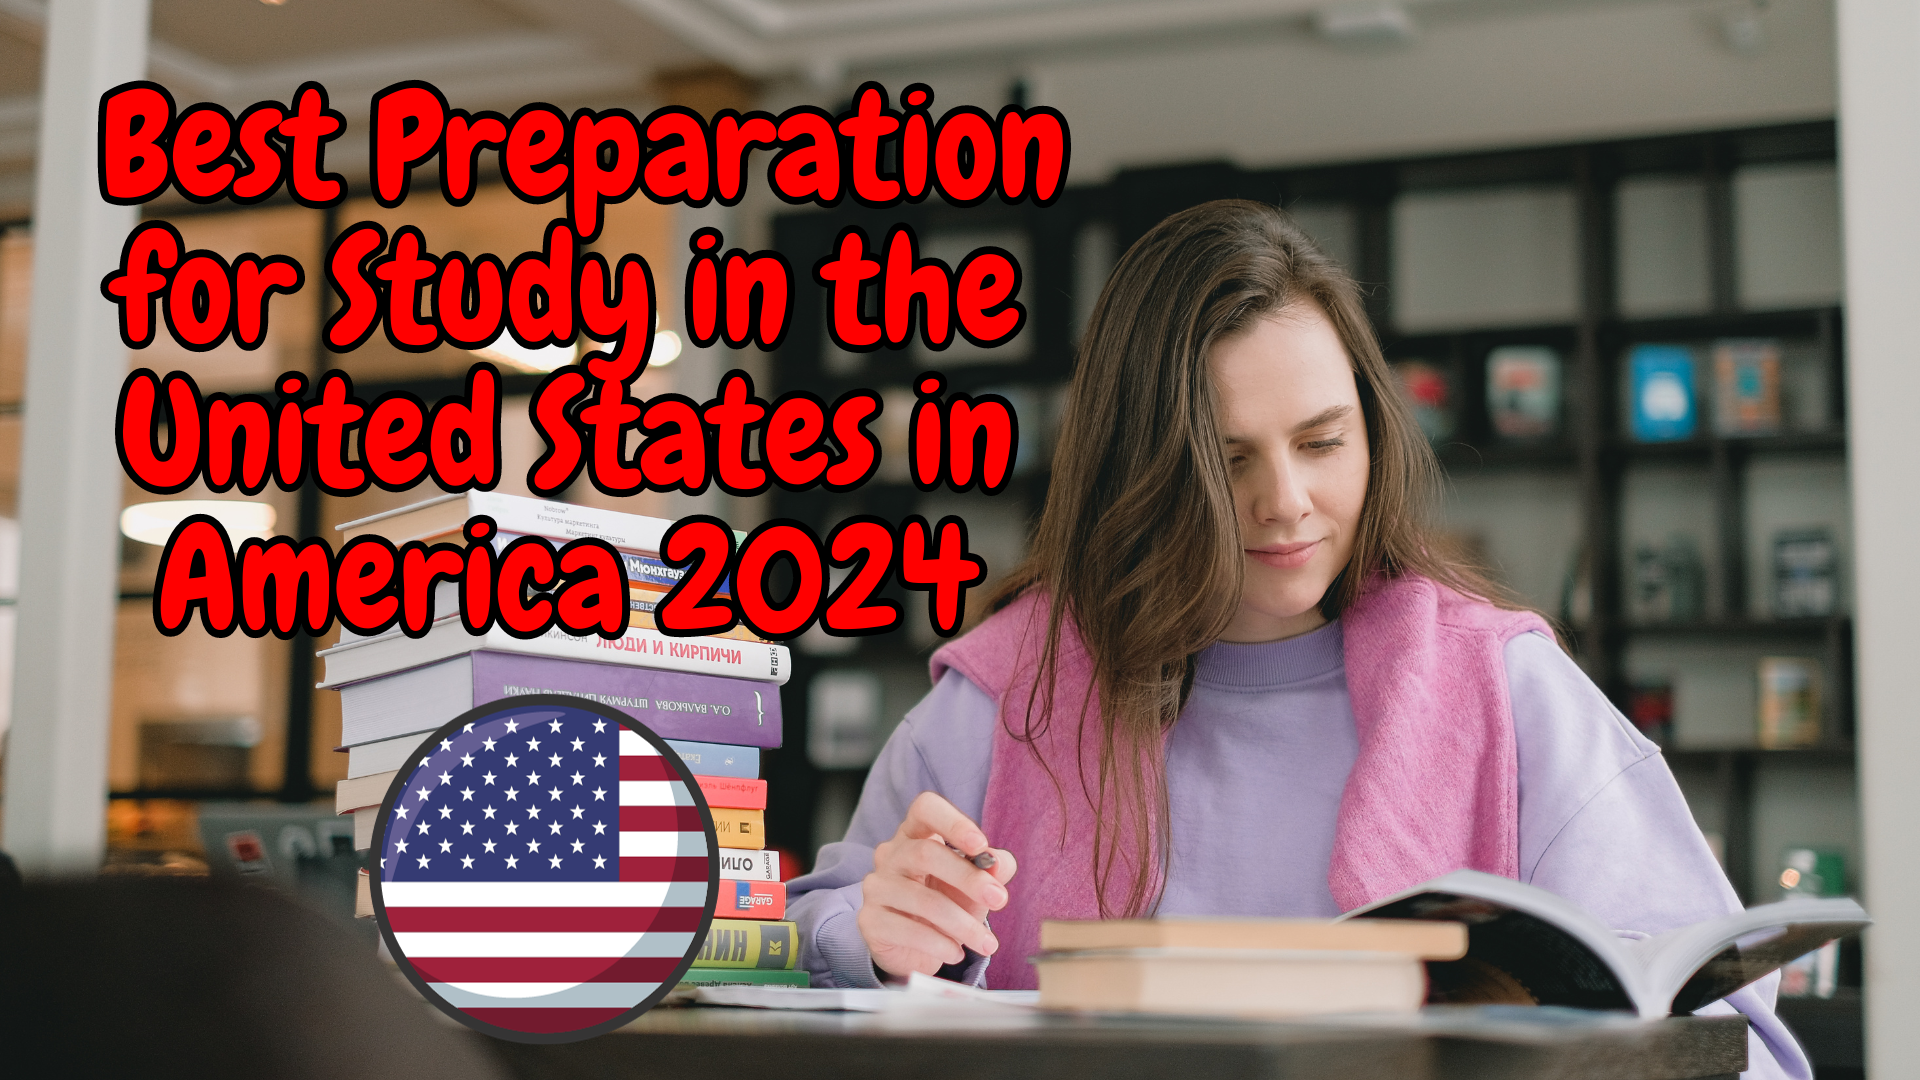 Best Preparation for Study in the United States in America 2024